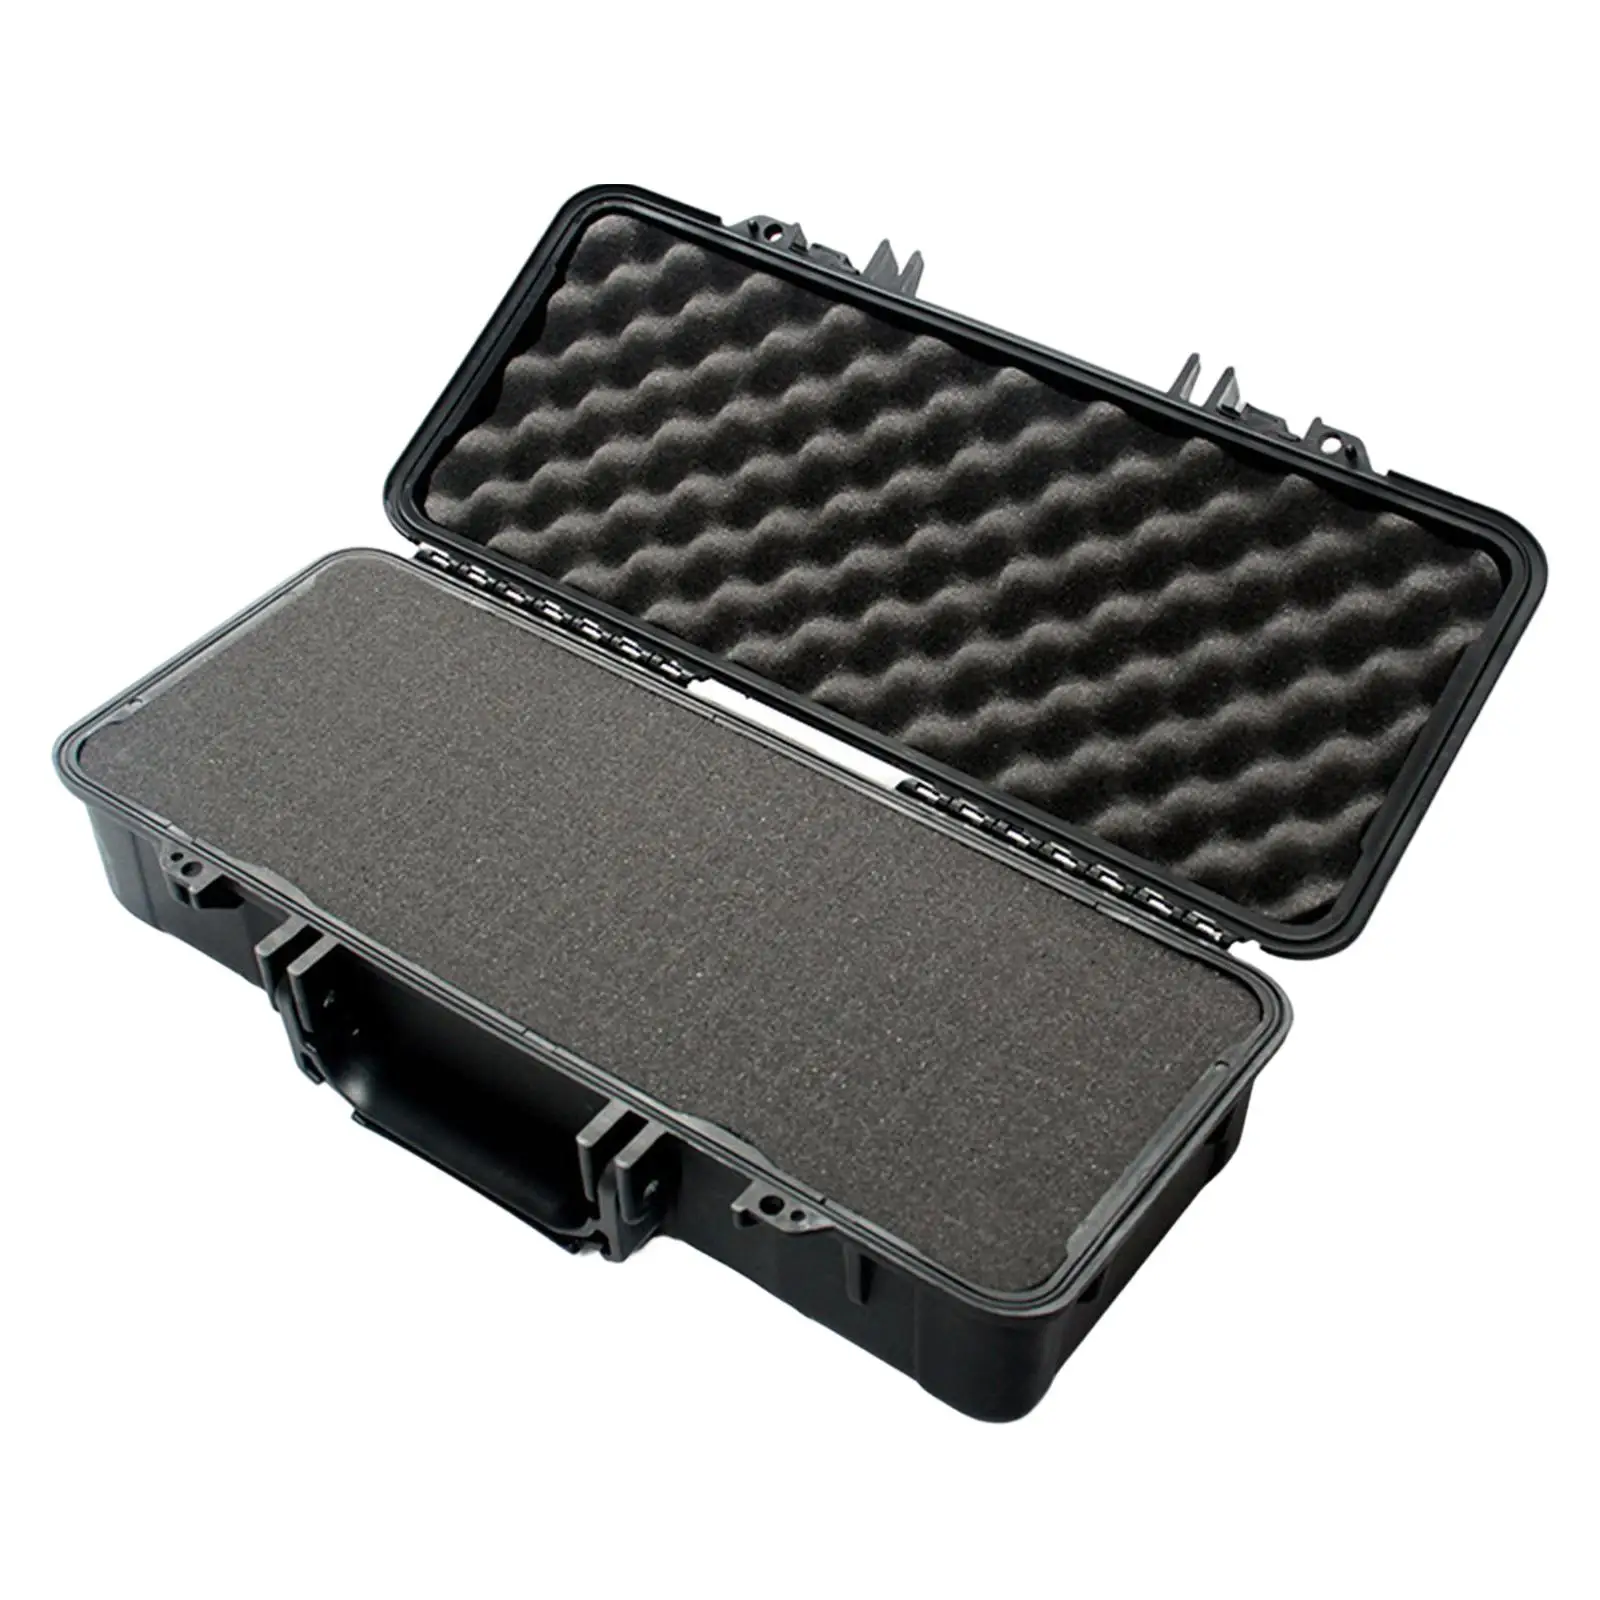 Equipment Tool Box Shockproof Protects Electronics, Tools, Cameras and Testing Equipment GC-4 Toolbox